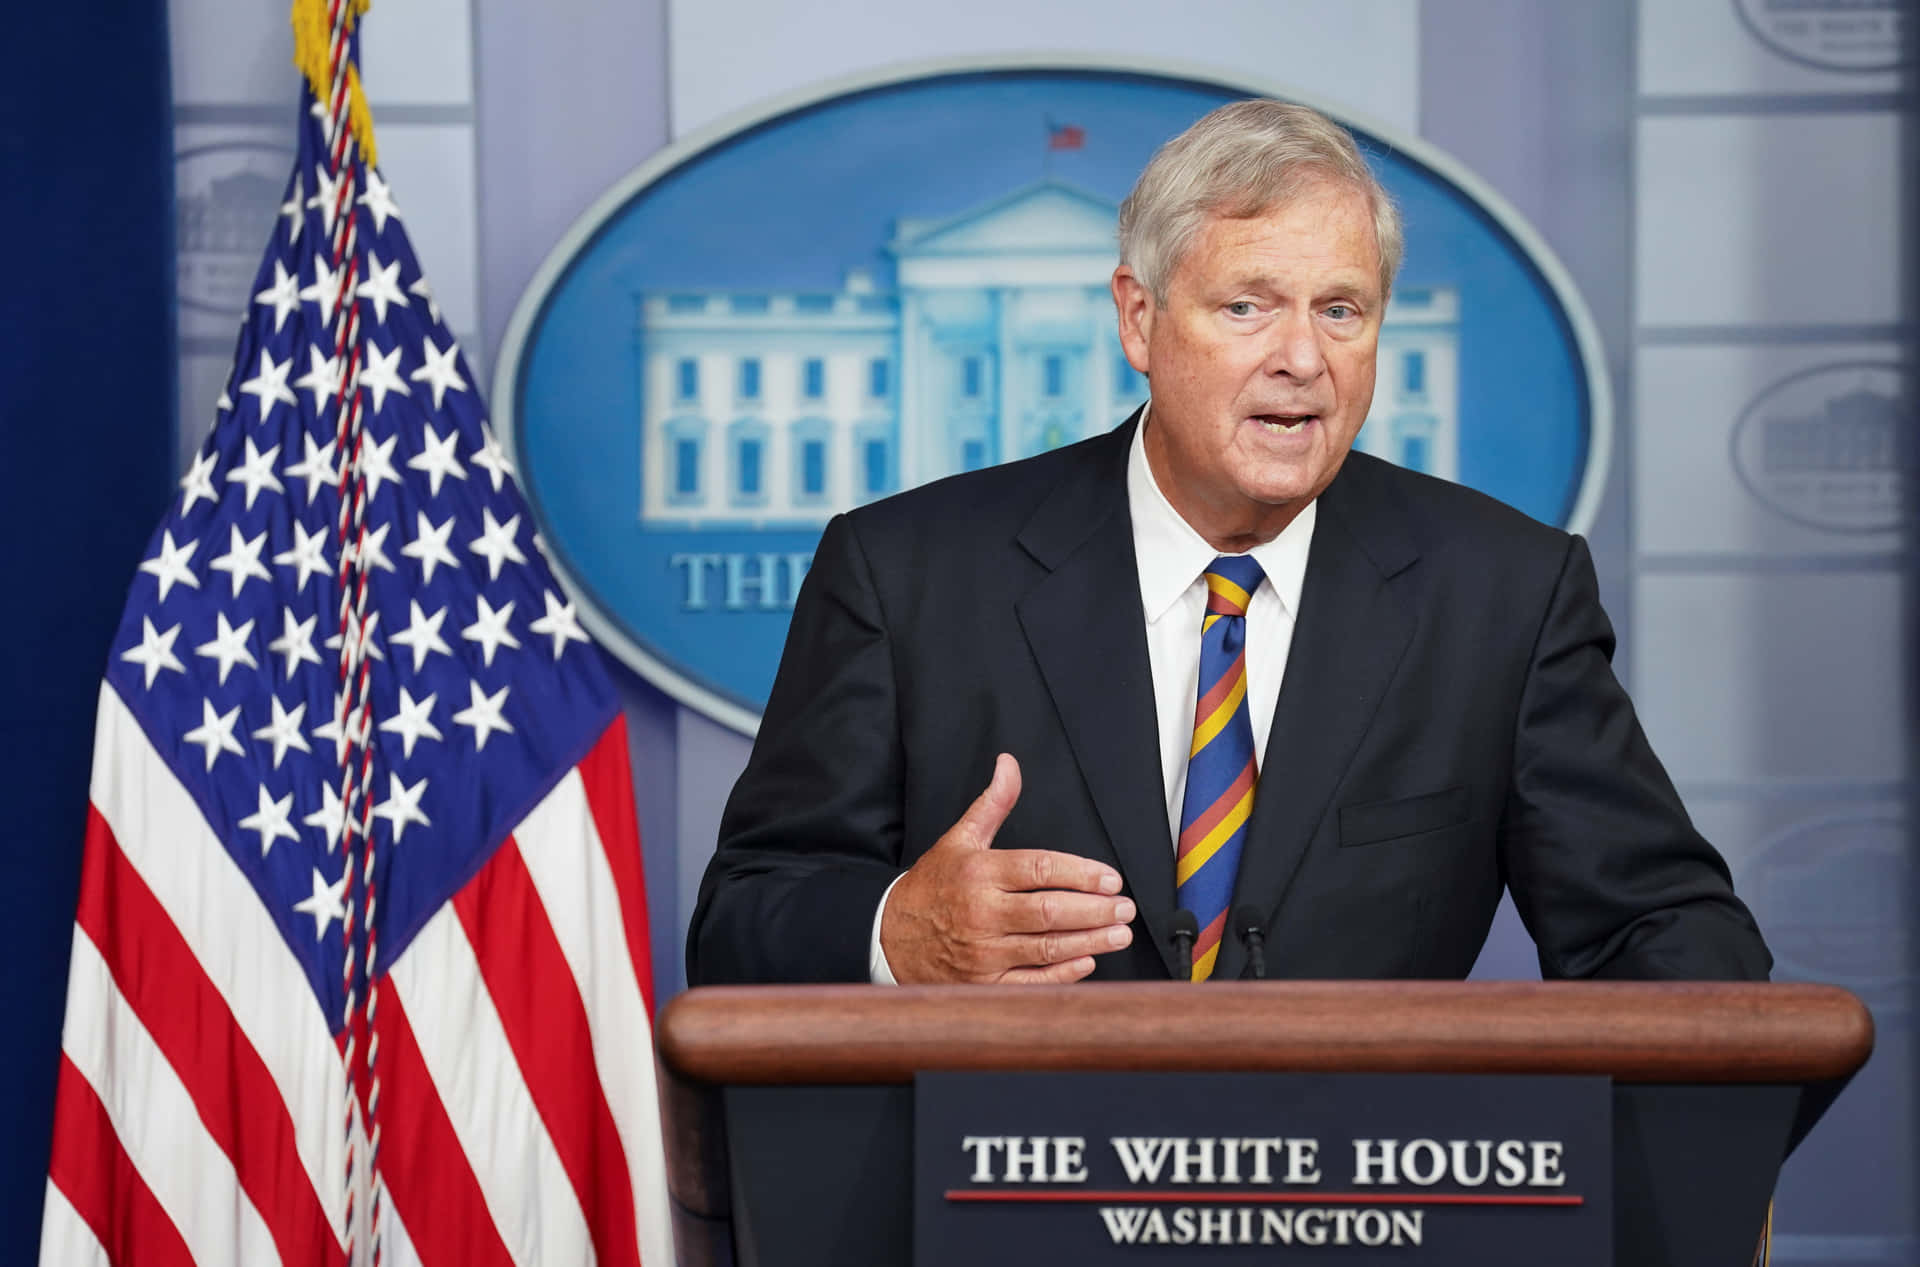 Former United States Secretary of Agriculture Tom Vilsack speaking at a press conference Wallpaper